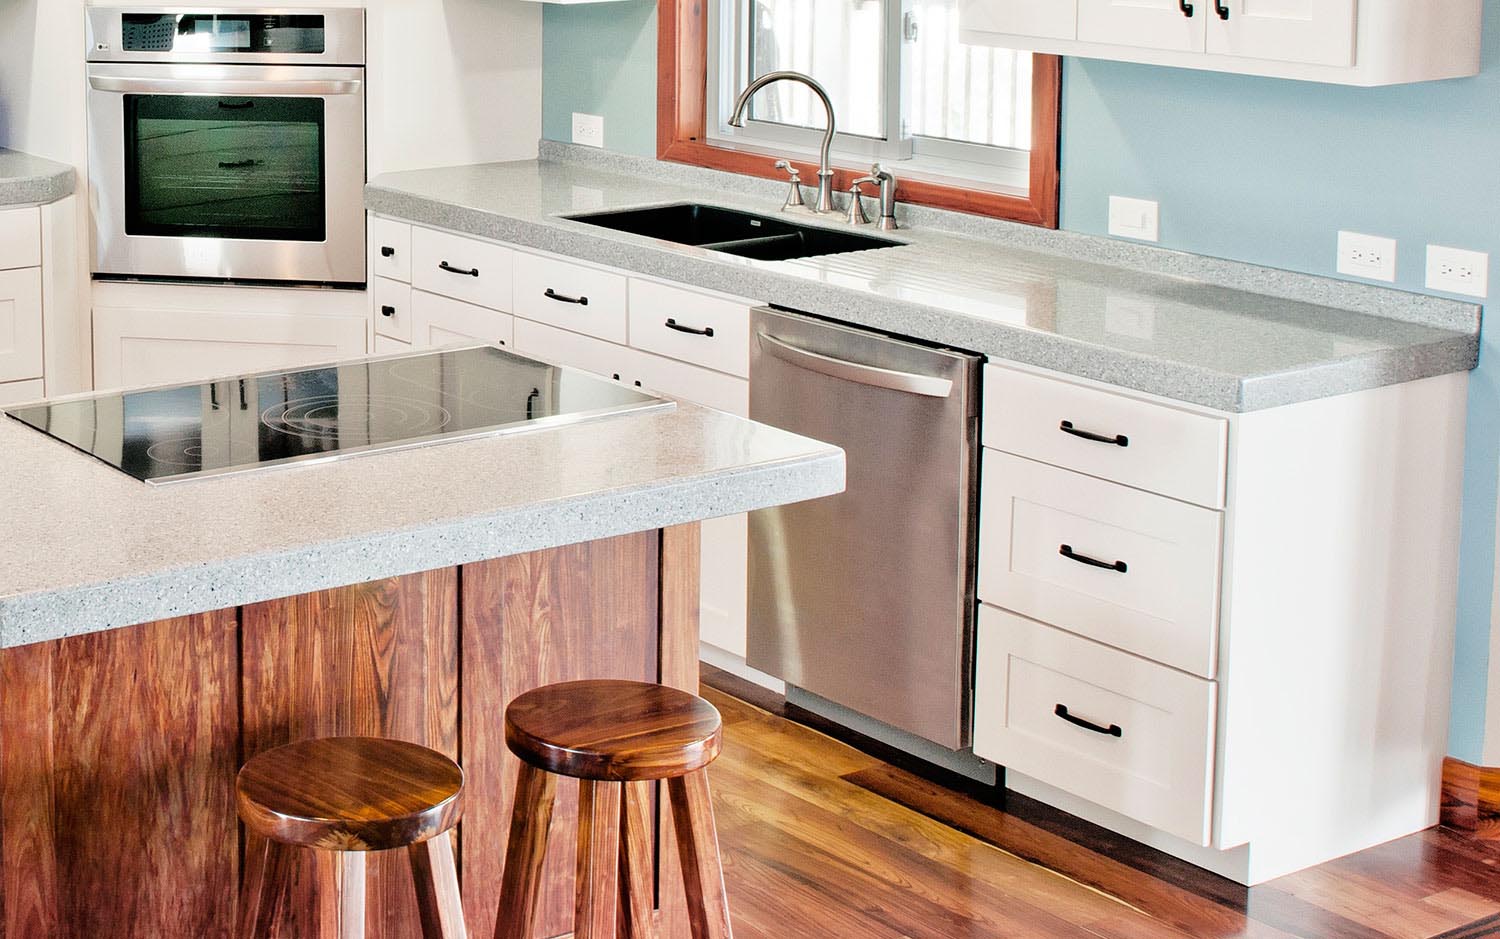 Kitchen cabinets, countertop, stools